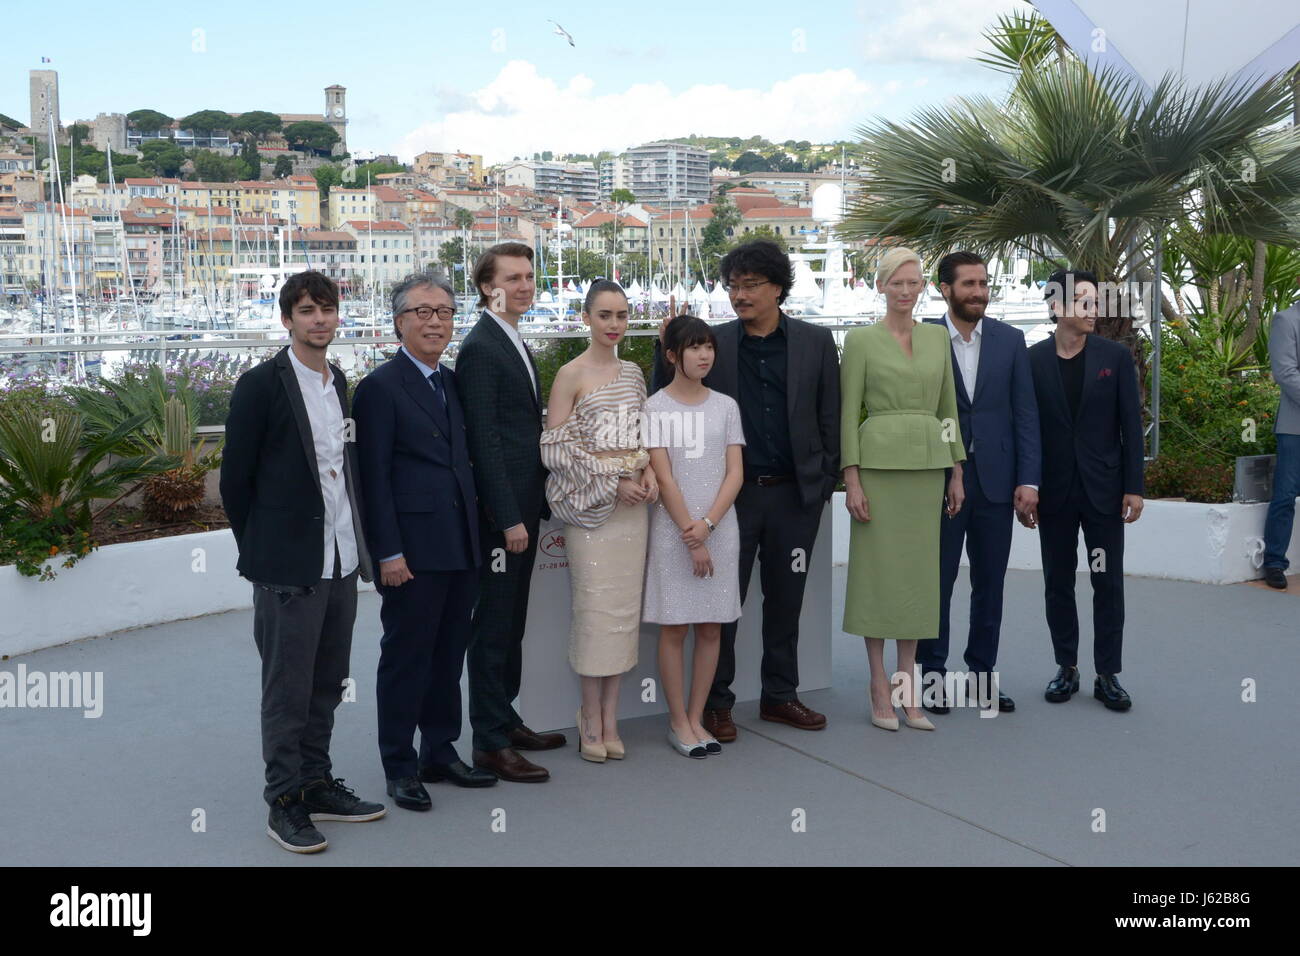 Cannes, France. 11th May, 2016. CANNES, FRANCE - MAY 19: Actors Devon Bostick, Byung Heebong, Paul Dano, Lily Collins, Ahn Seo-Hyun, director Bong Joon-Ho, Tilda Swinton, Jake Gyllenhaal and Steven Yeun attend the 'Okja' photocall during the 70th annual Cannes Film Festival at Palais des Festivals on May 19, 2017 in Cannes, France Credit: Frederick Injimbert/ZUMA Wire/Alamy Live News Stock Photo